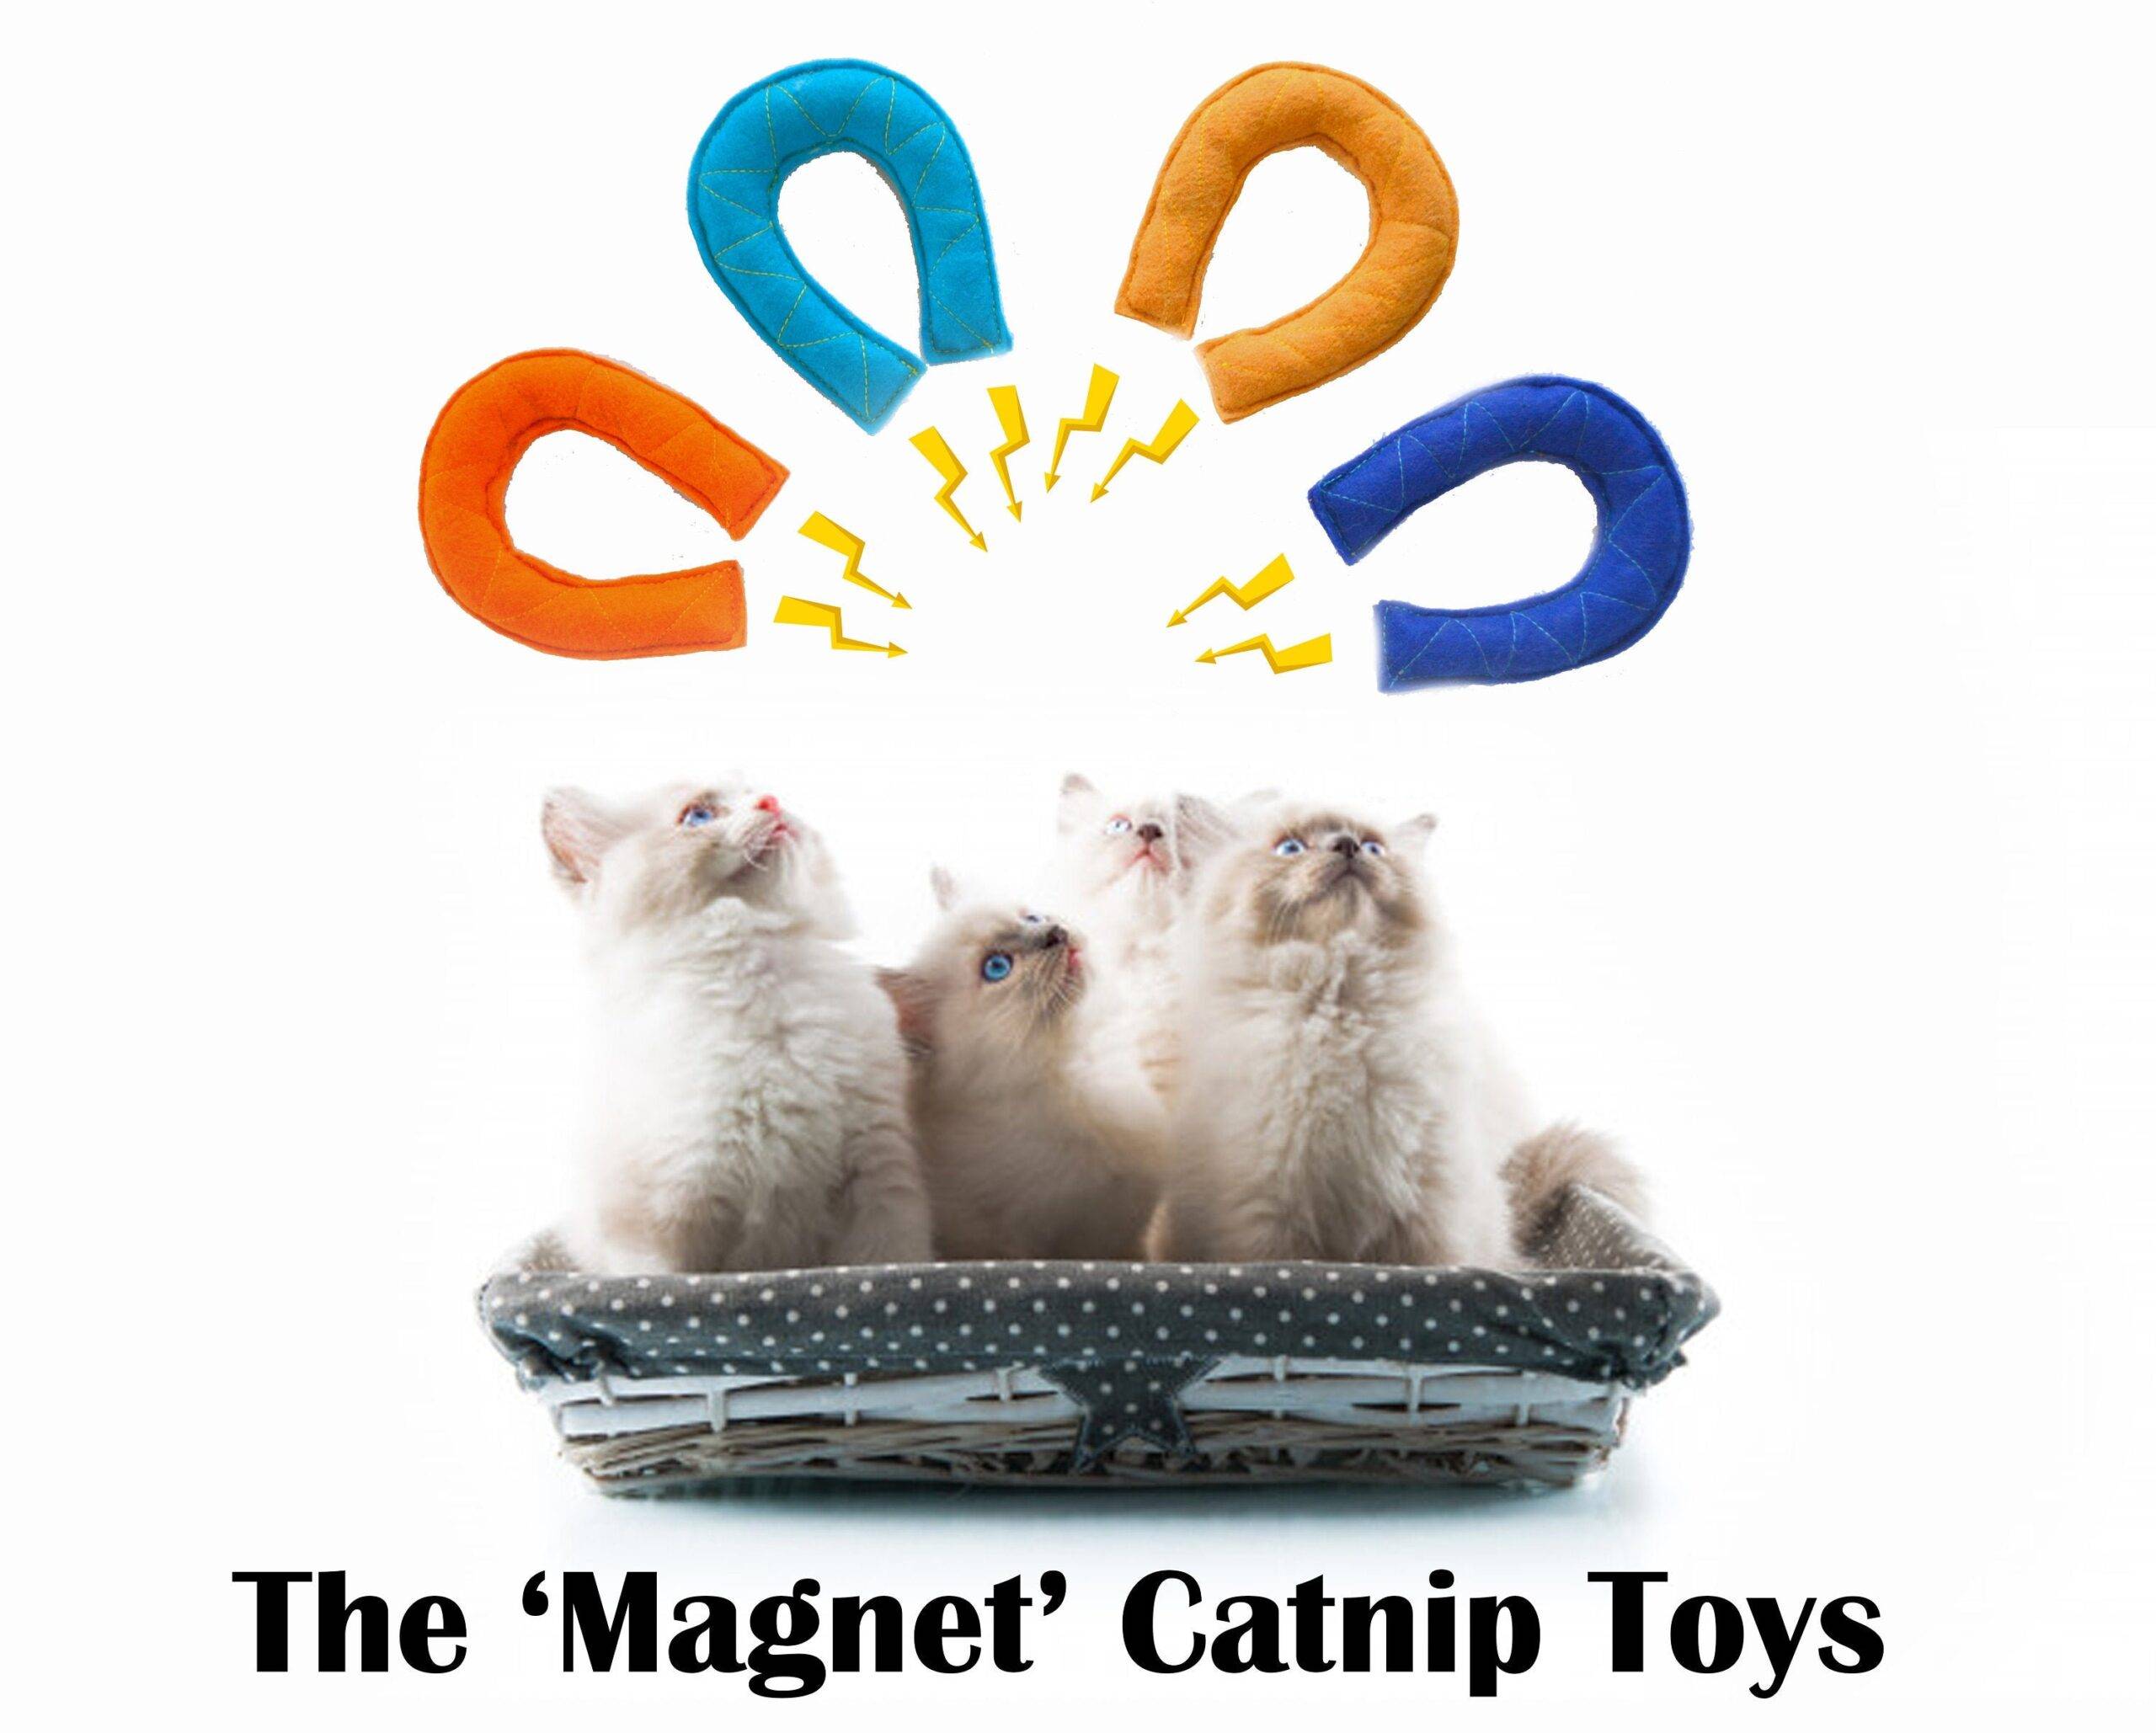 Magnet catnip toy, Unique catnip cat toy, felt cat toy filled with fresh catnip, kitten toys, gift for cat – Crafts4Cats